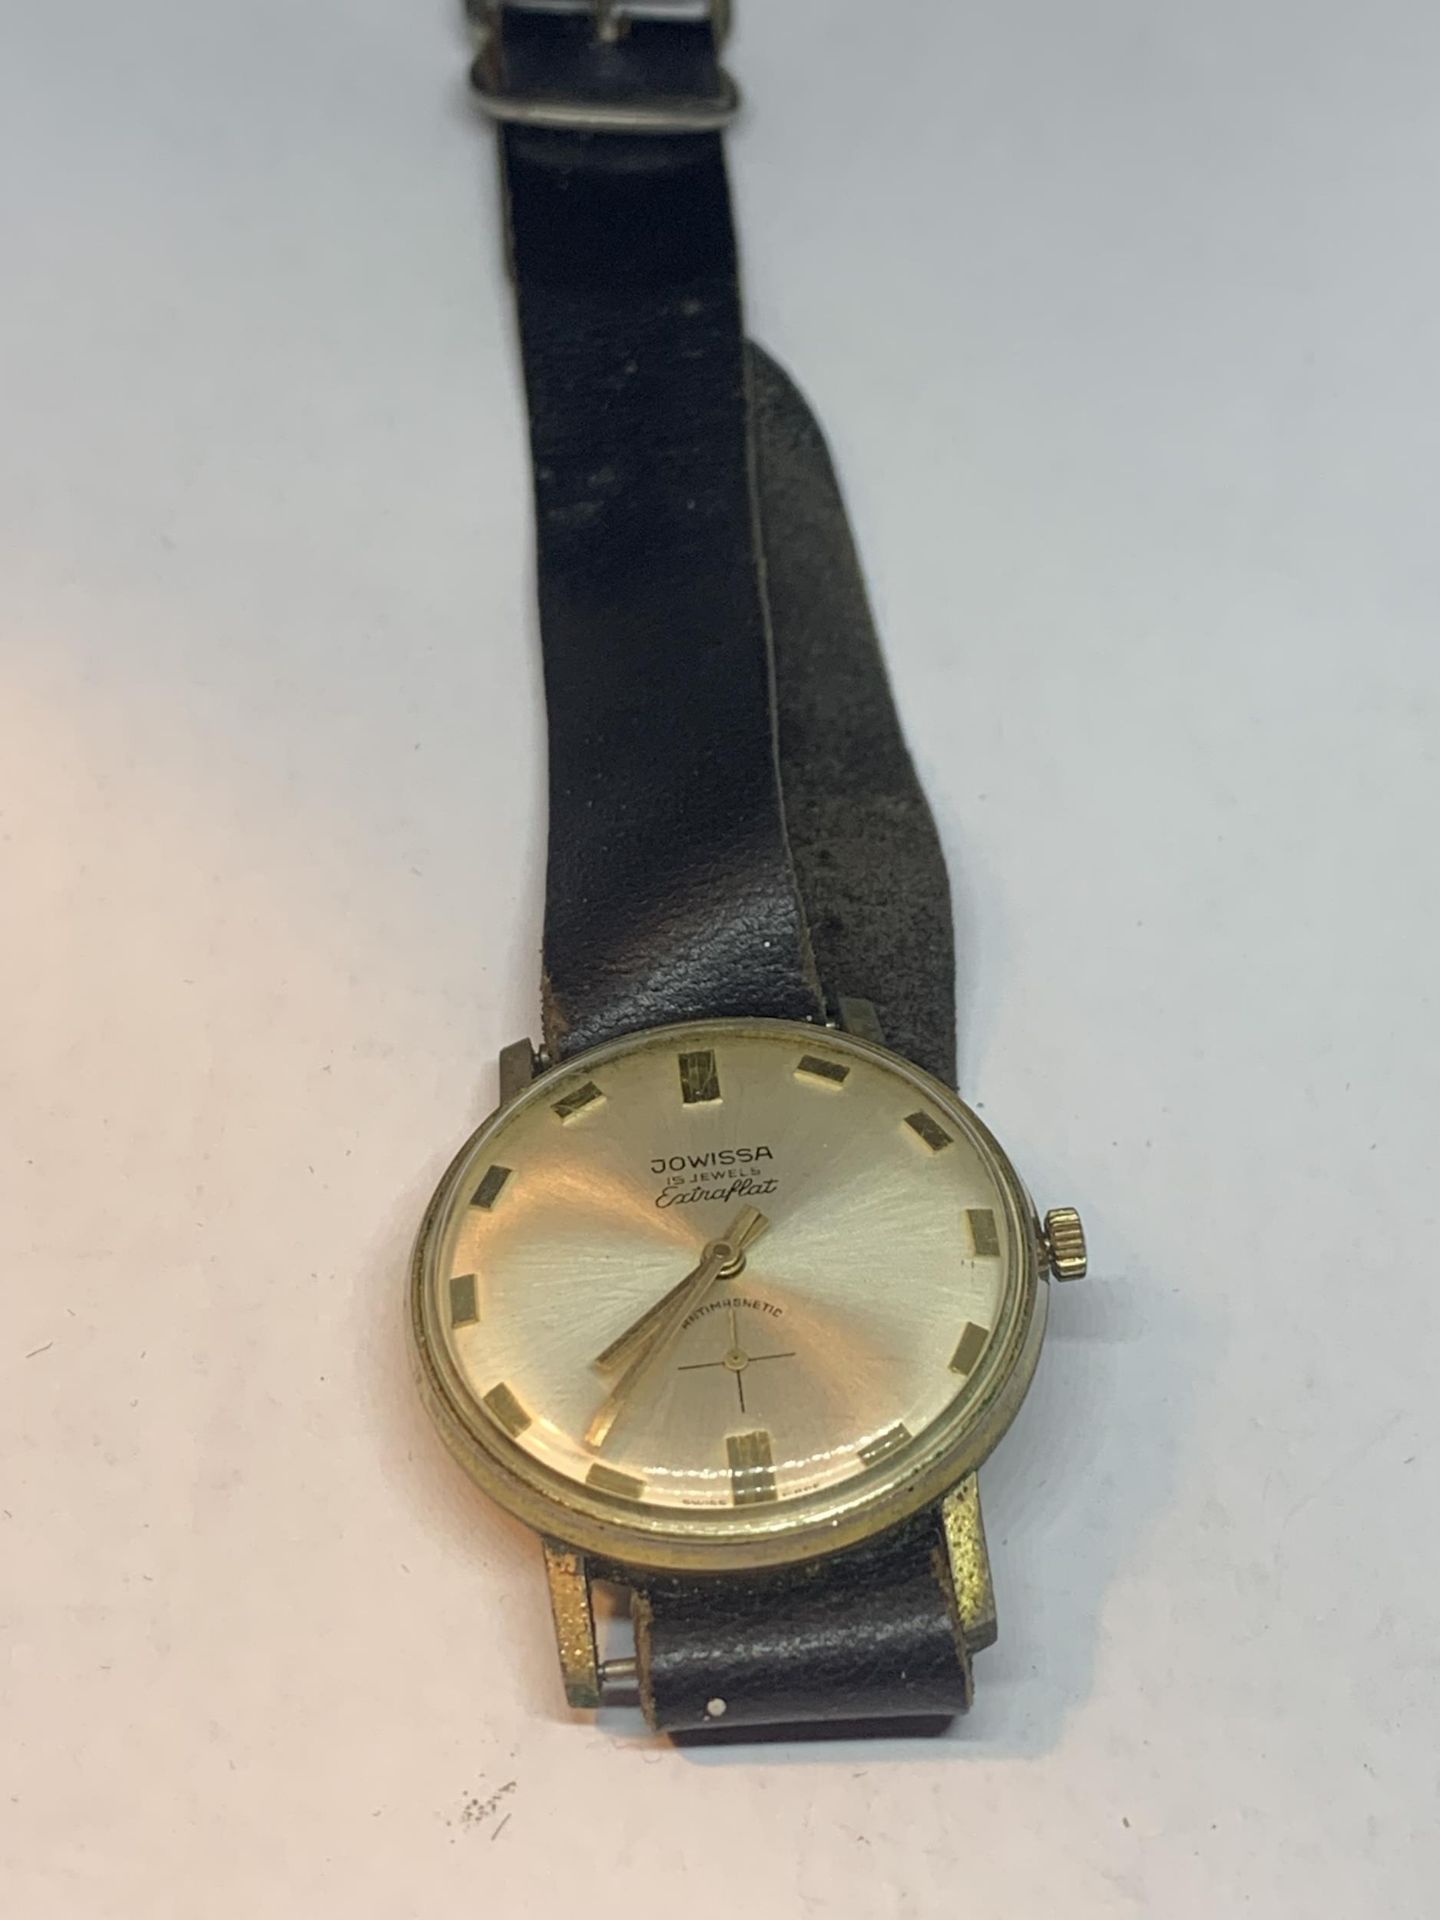 A JOWISSA VINTAGE SUB DIAL WRIST WATCH SEEN IN WORKING ORDER BUT NO WARRANTY